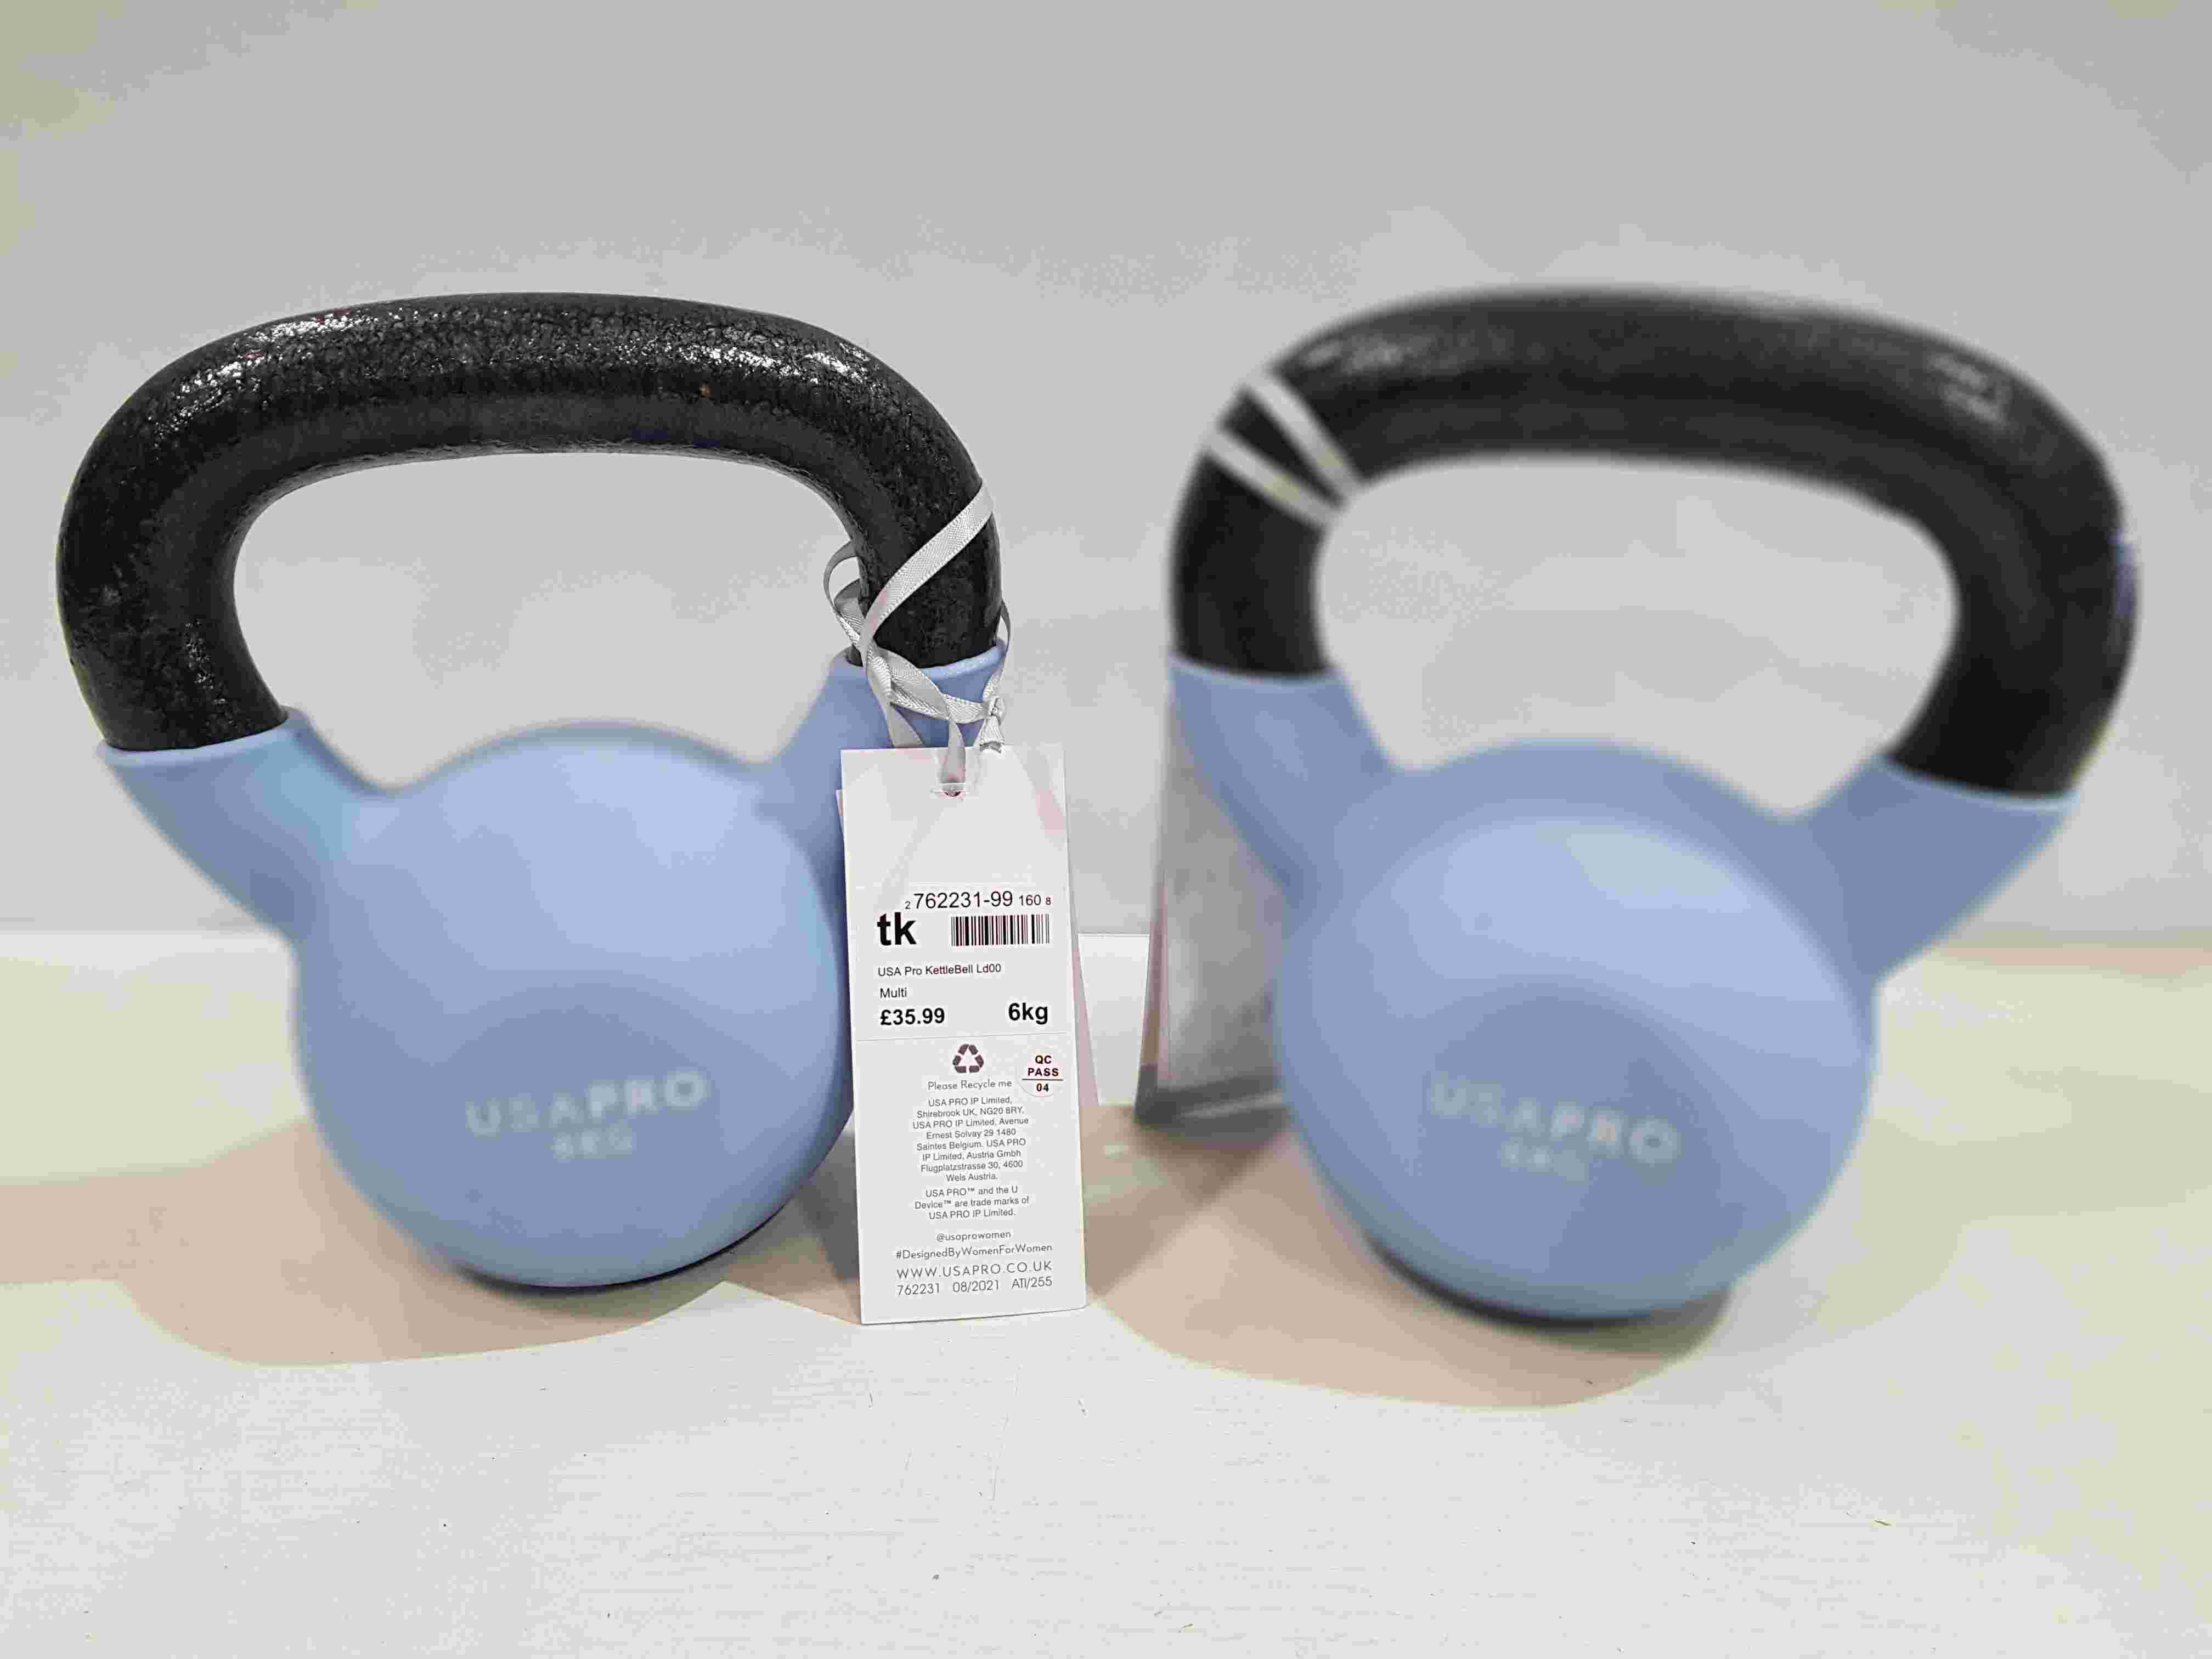 20 X BRAND NEW SETS OF 2 USA PRO 6 KG KETTLEBELLS ( 40 TOTAL ) - IN 20 BOXES